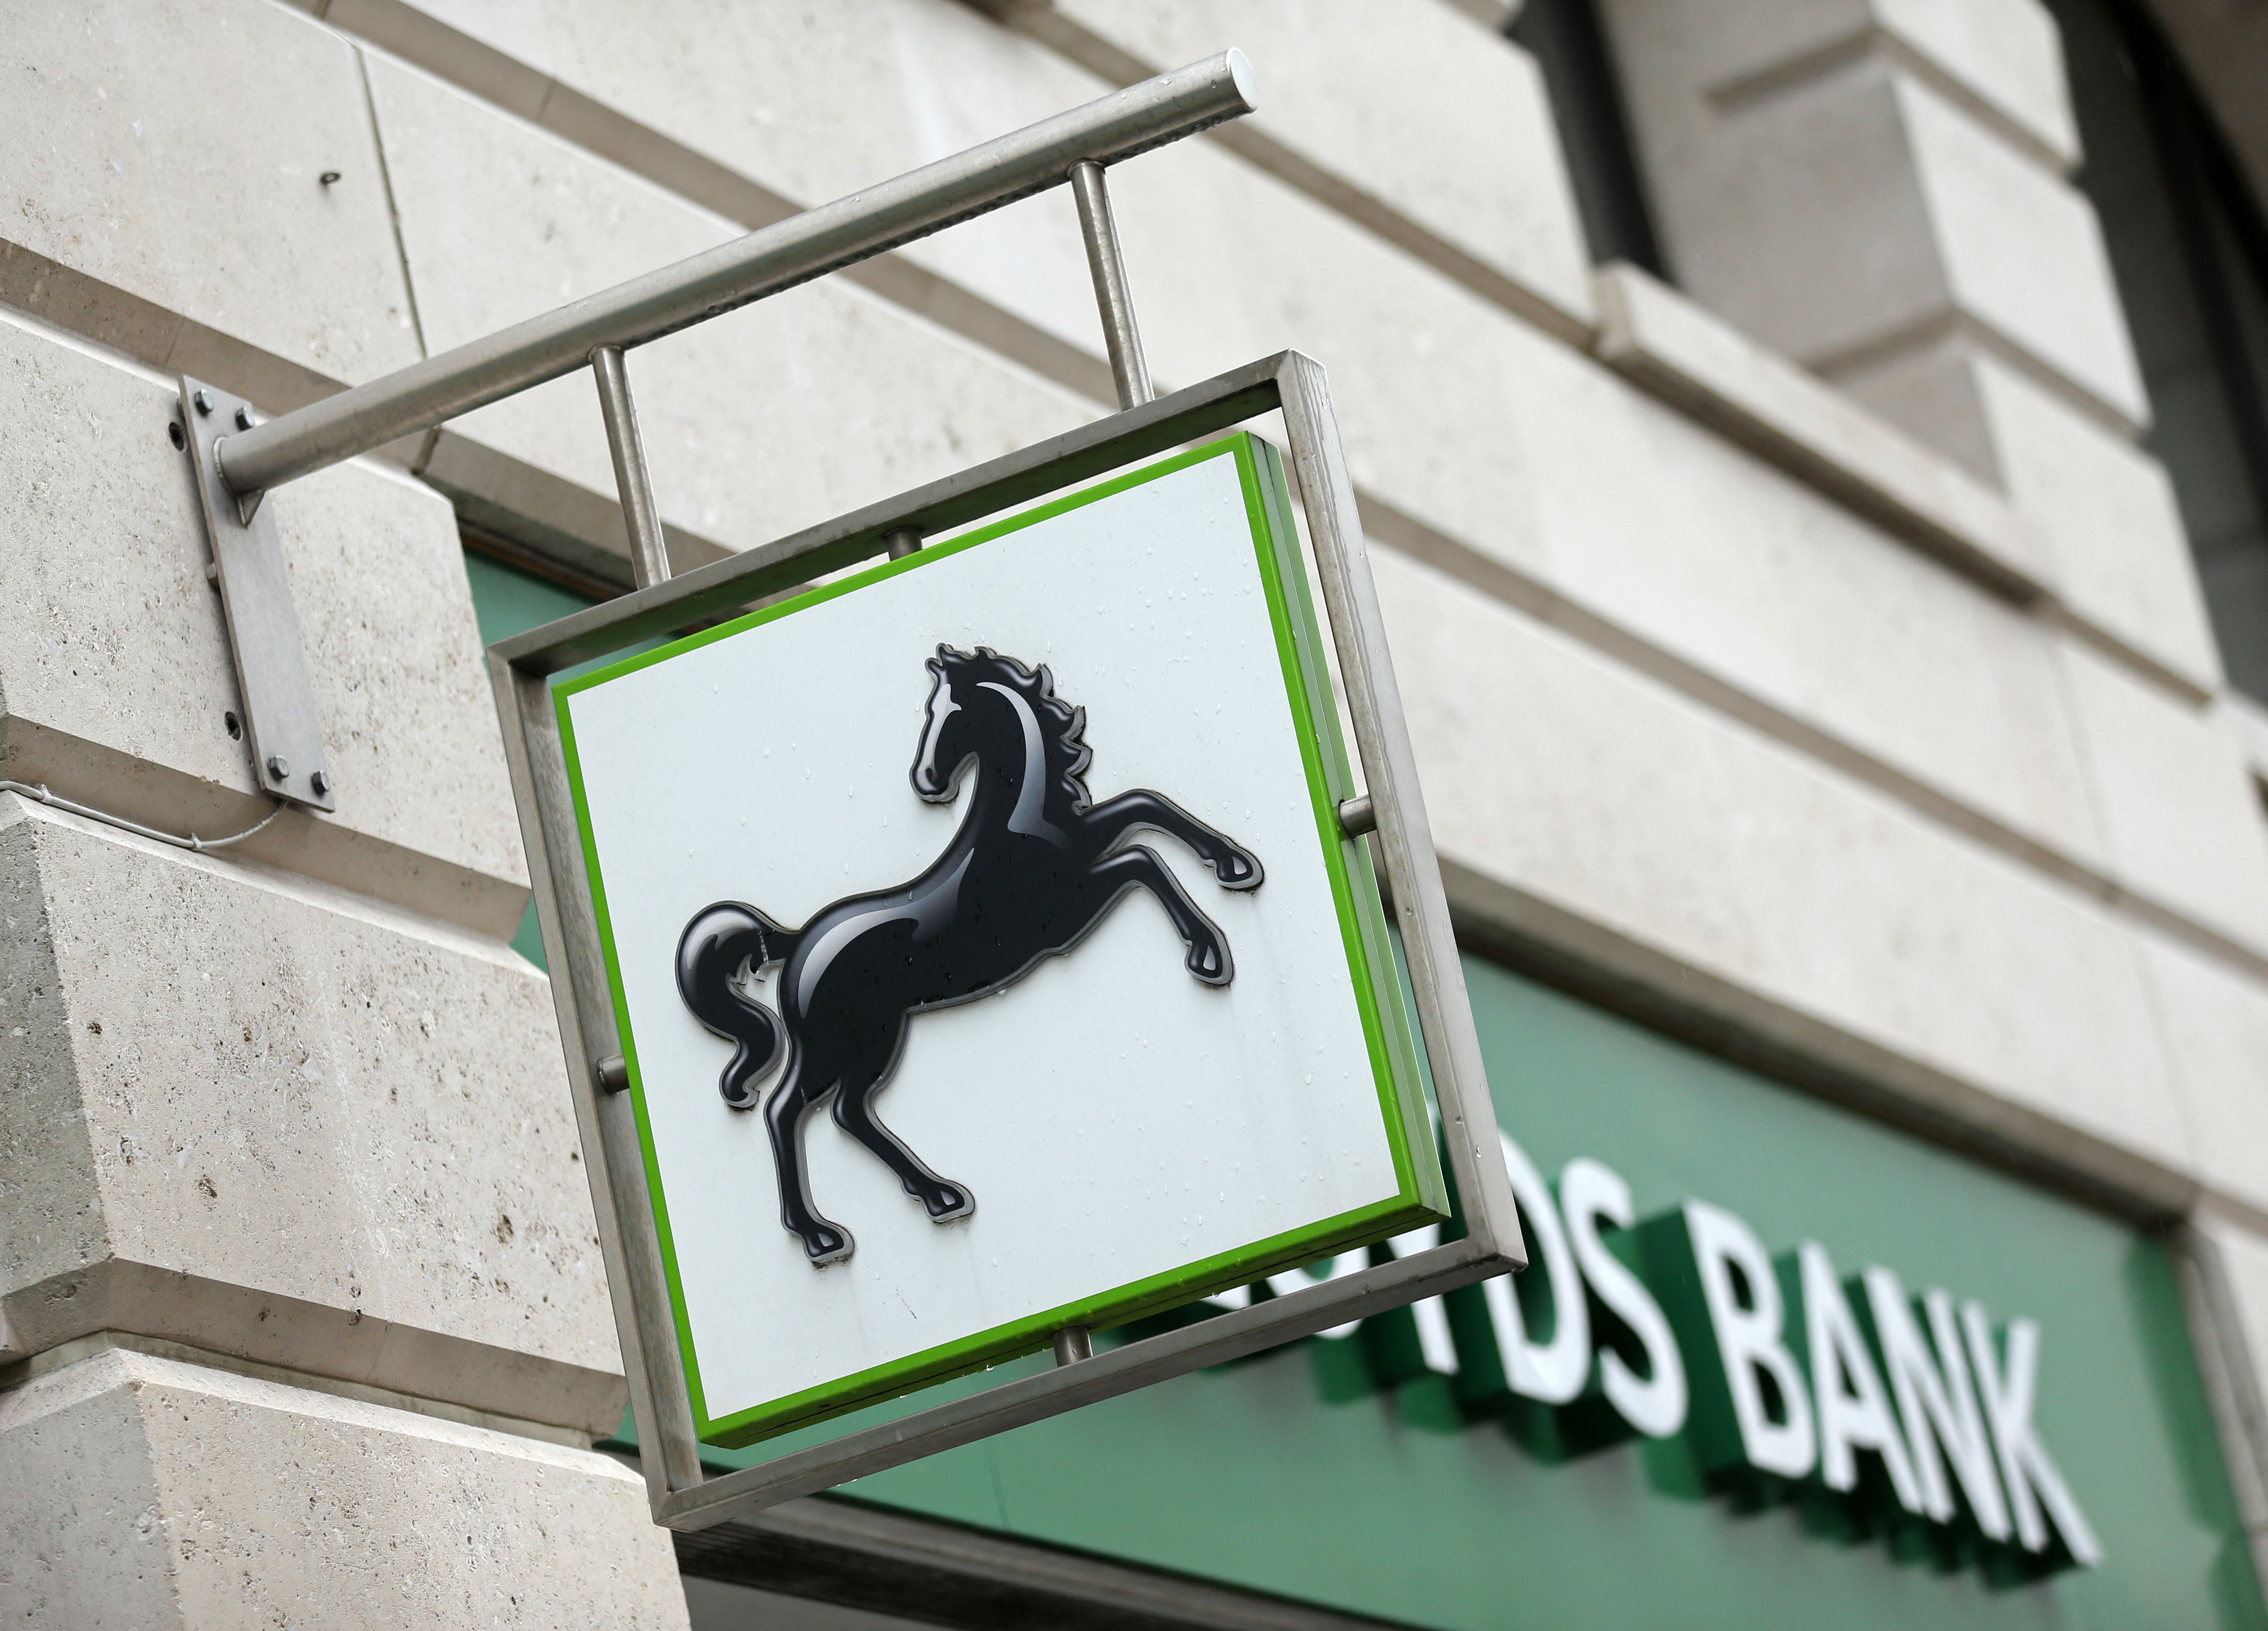 Lloyds is increasing its Club Lloyds silver and platinum charges from July